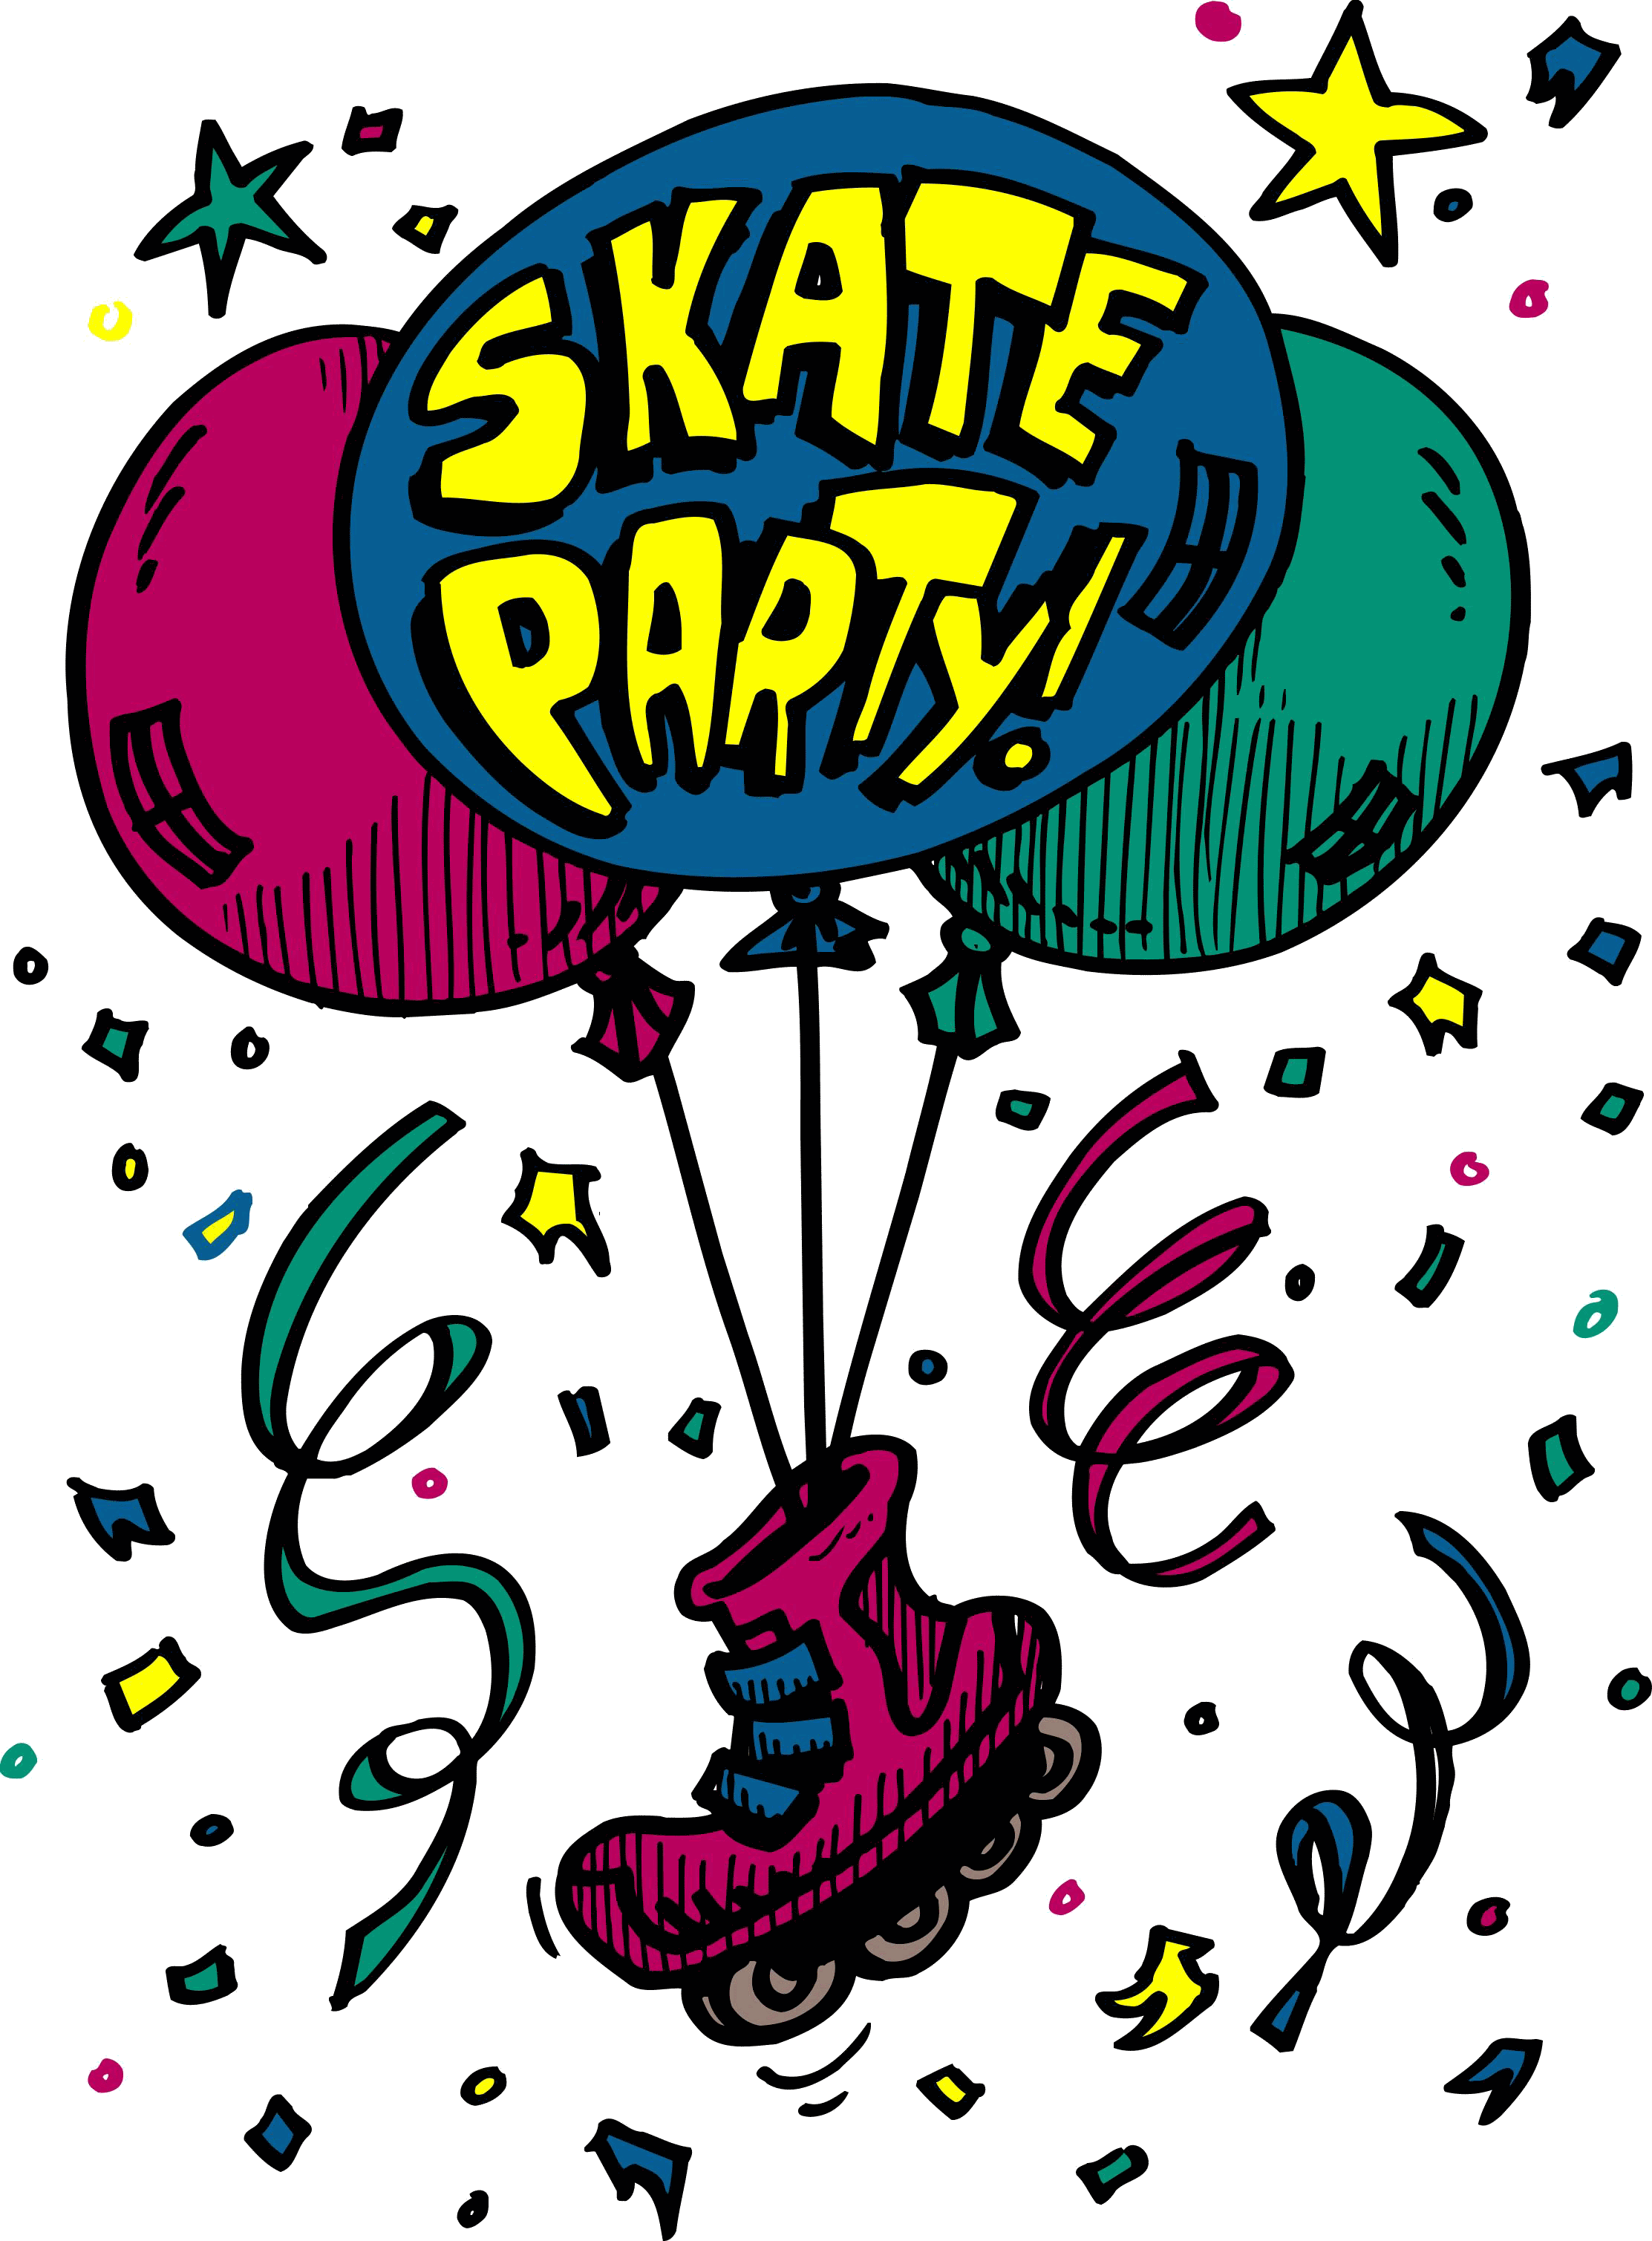 Skating party . Park clipart night clipart